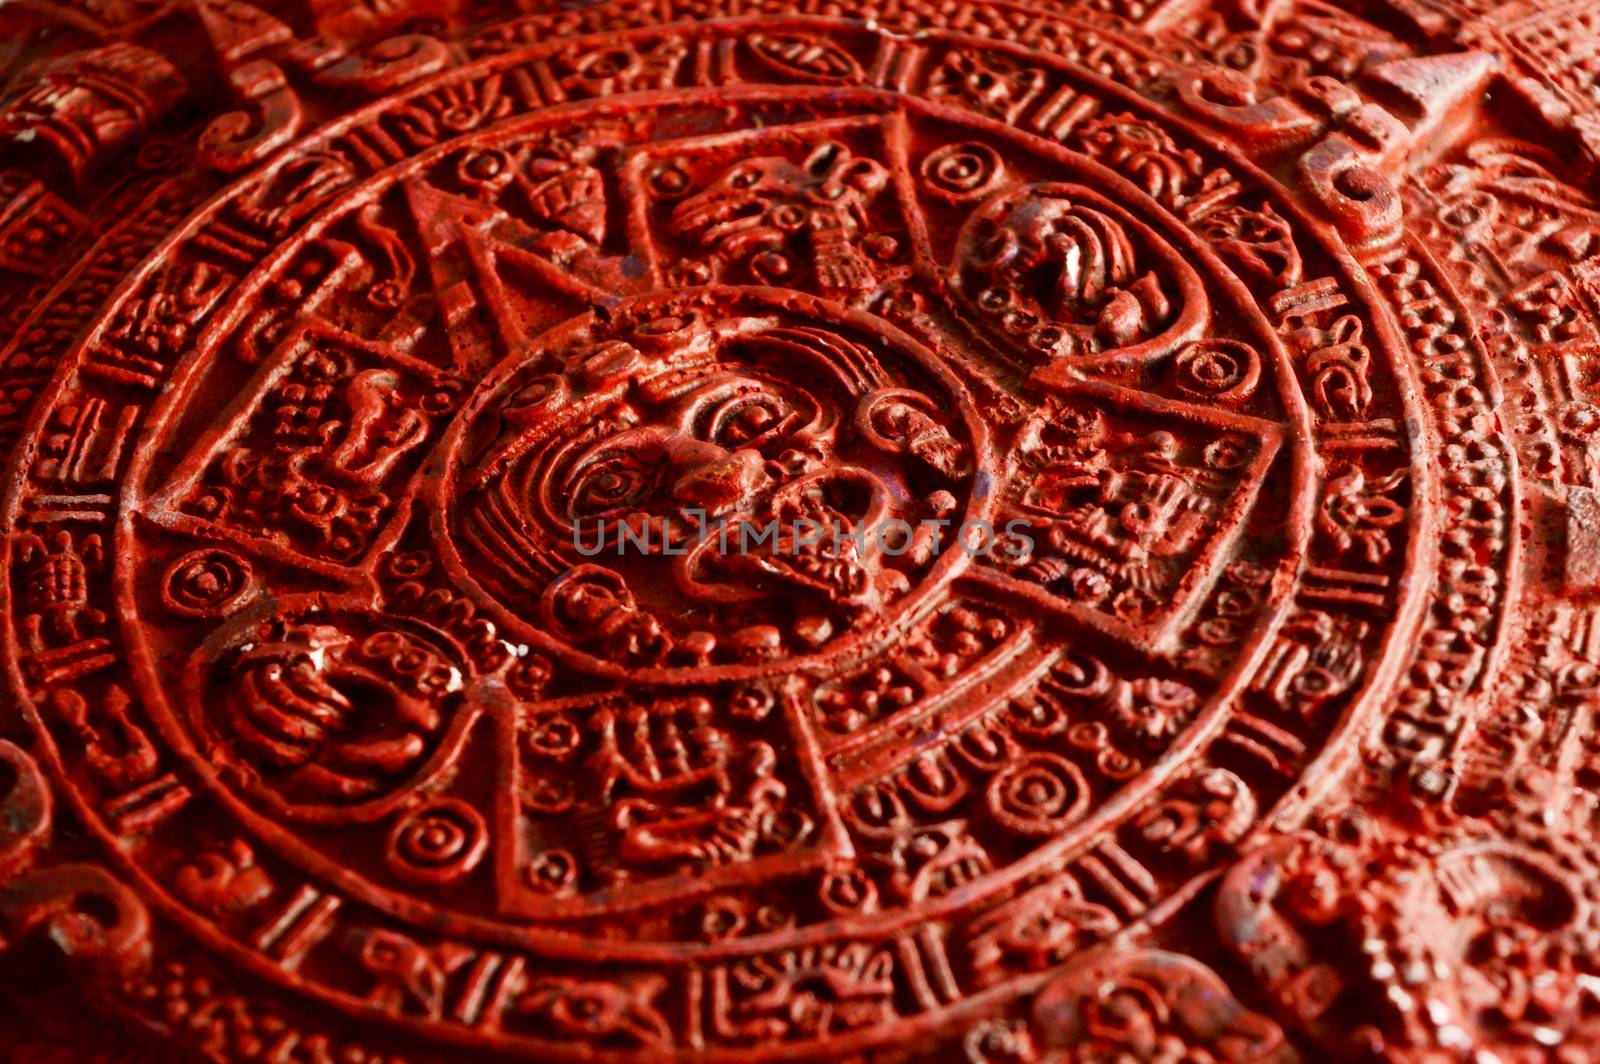 Closeup view of the textured details on a crafted Mayan calendar.